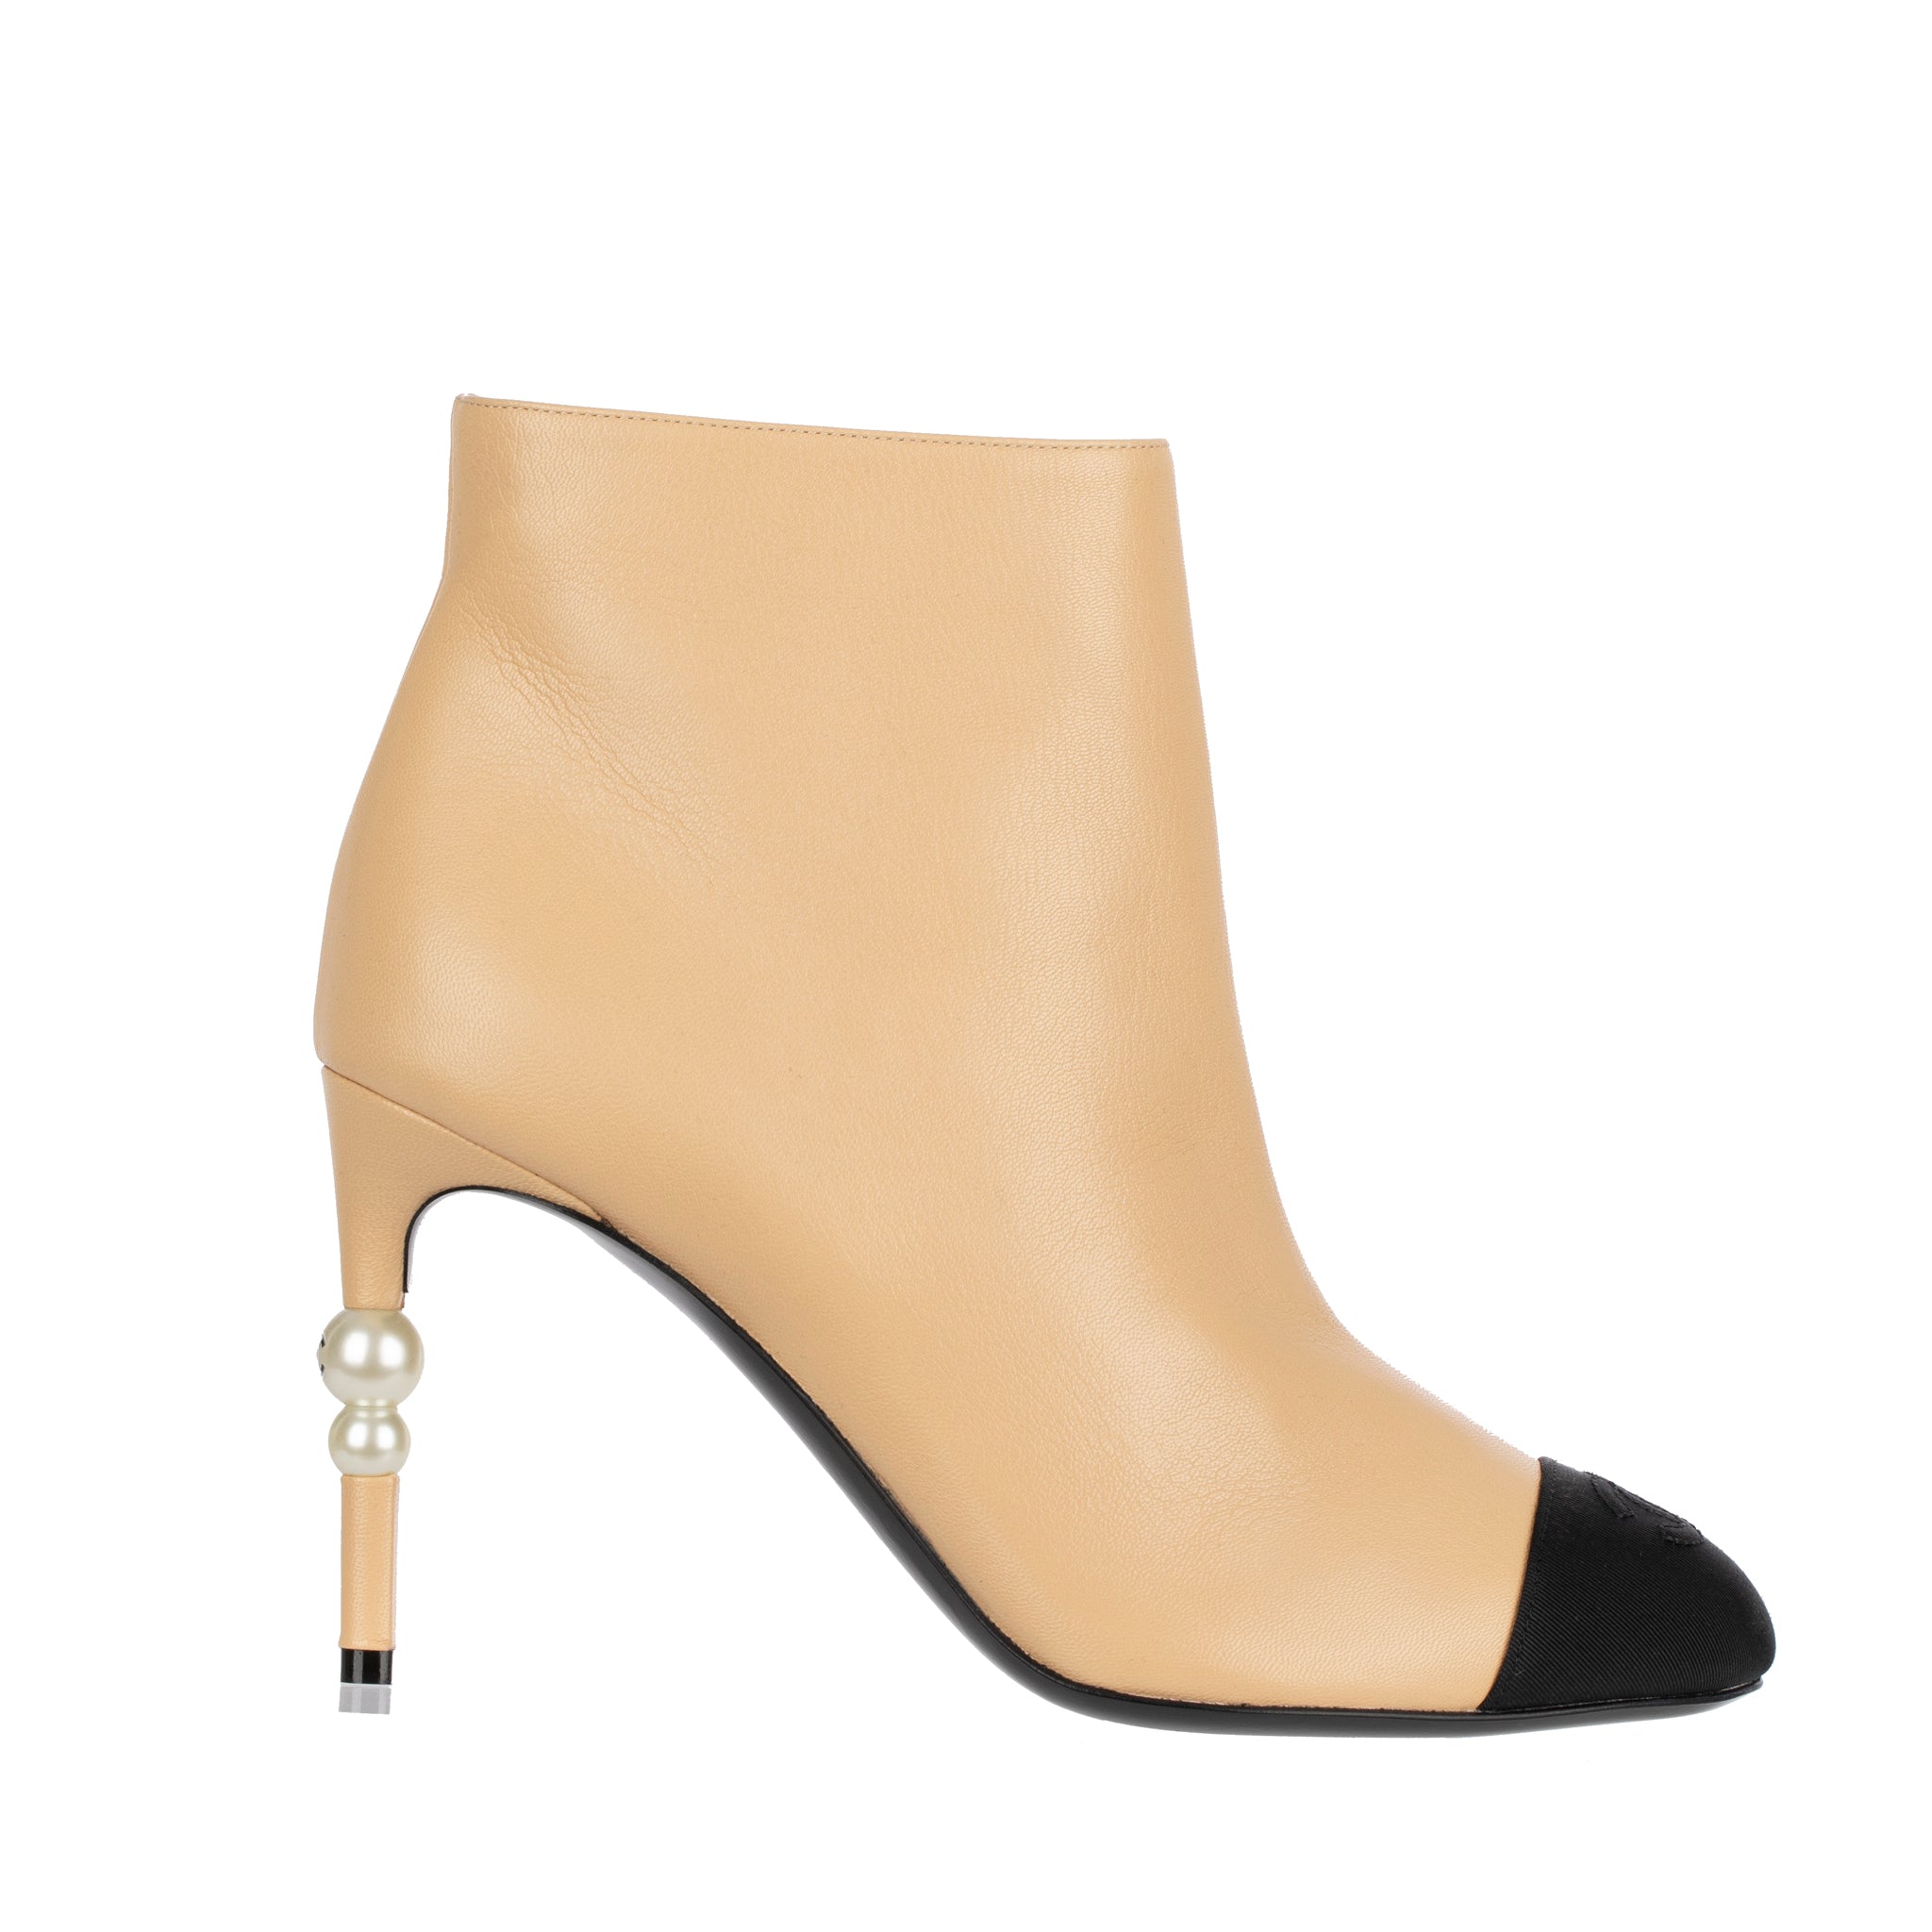 Chanel Ankle Boots Beige & Black With Pearl Details 38.5 FR